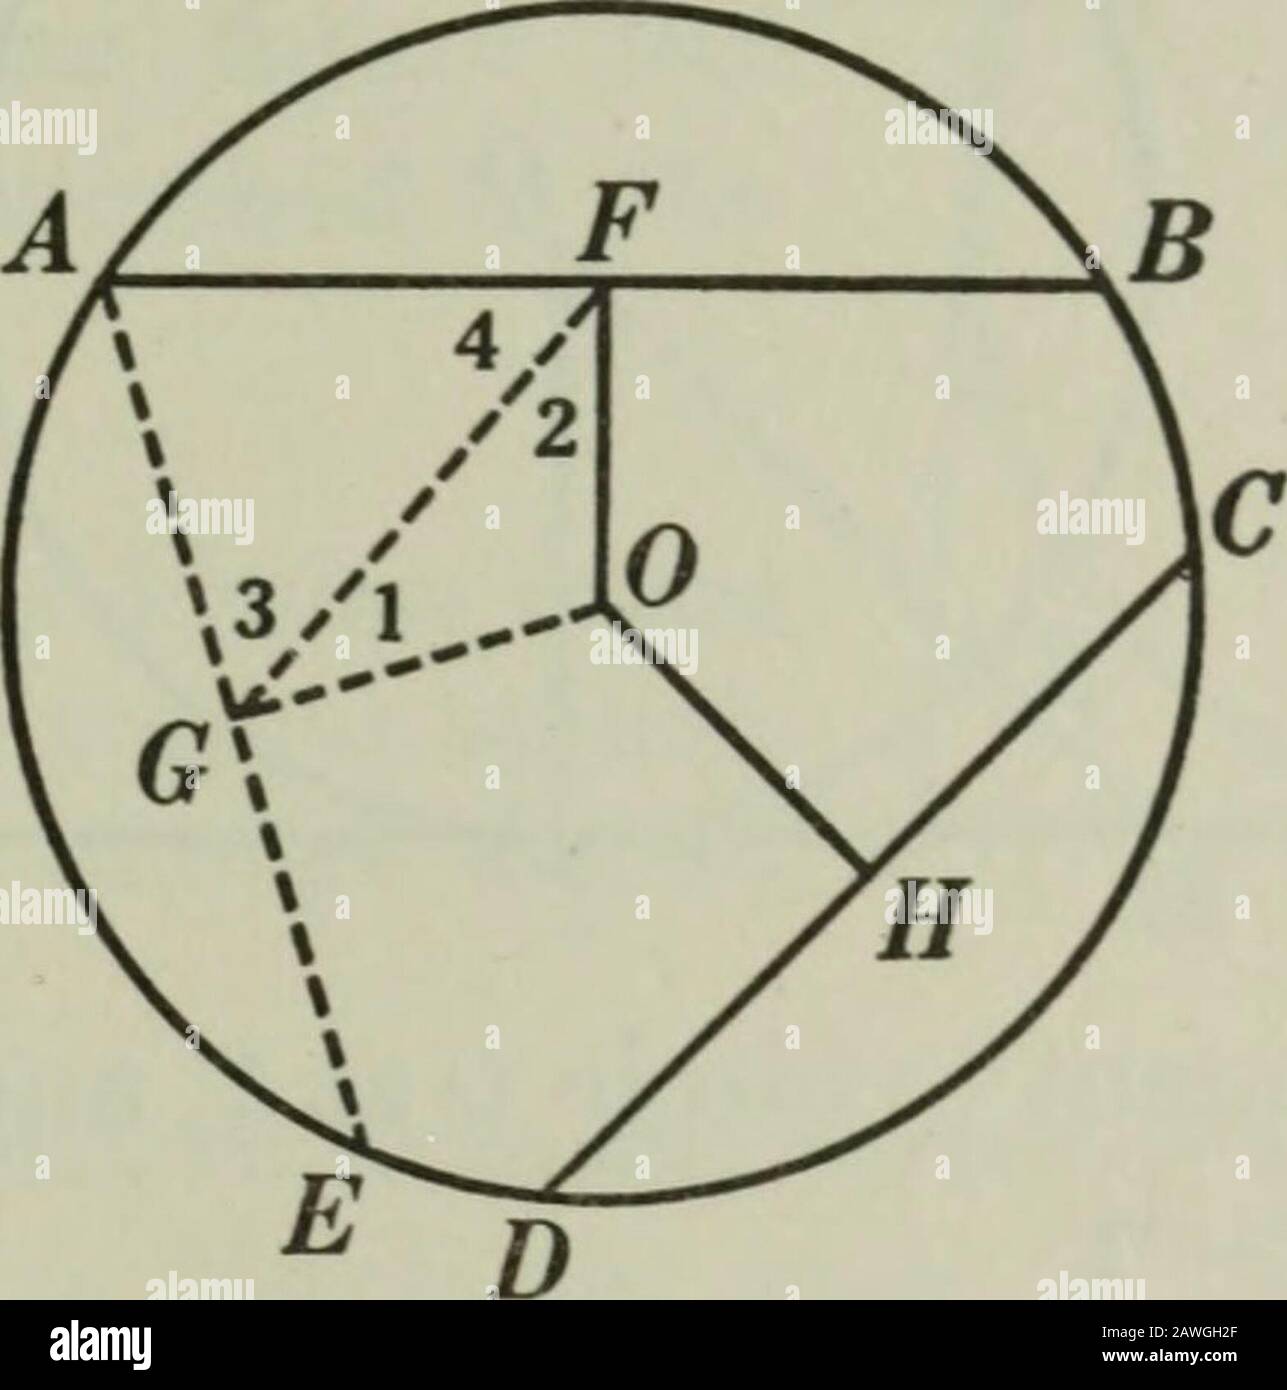 Plane and solid geometry . Given circle 0 with chord AB &gt; chord CD, and let OF andOH be the distances of AB and CB from center O, respectively. To prove OF CD. 5. .-. .4D &gt; ^J?;. 6. i^ and C are the mid-points of AB and AEy respectively..-. AF:&gt; AG..-. Zl &gt; Z2.Z ^/O = Z OCX 7. 8. 9.10.11.12.13. .-. Z3 &lt;Z4..-. OF &lt; OG.OG = OH,.-. 0F&lt; OH. Q.E.D. 1. § 54, 15. 2. § 155. 3. § 54, 15. 4. § By hyp 5. §309. 6. §302. 7. § 54, 8 b. 8. §166. 9, § 64. 10. § 54, 6. 11. § 164. 12. § 307, I. 13. § 309. 309. Note. The student should give the full statement of the sub-stitution made; thus, Stock Photo